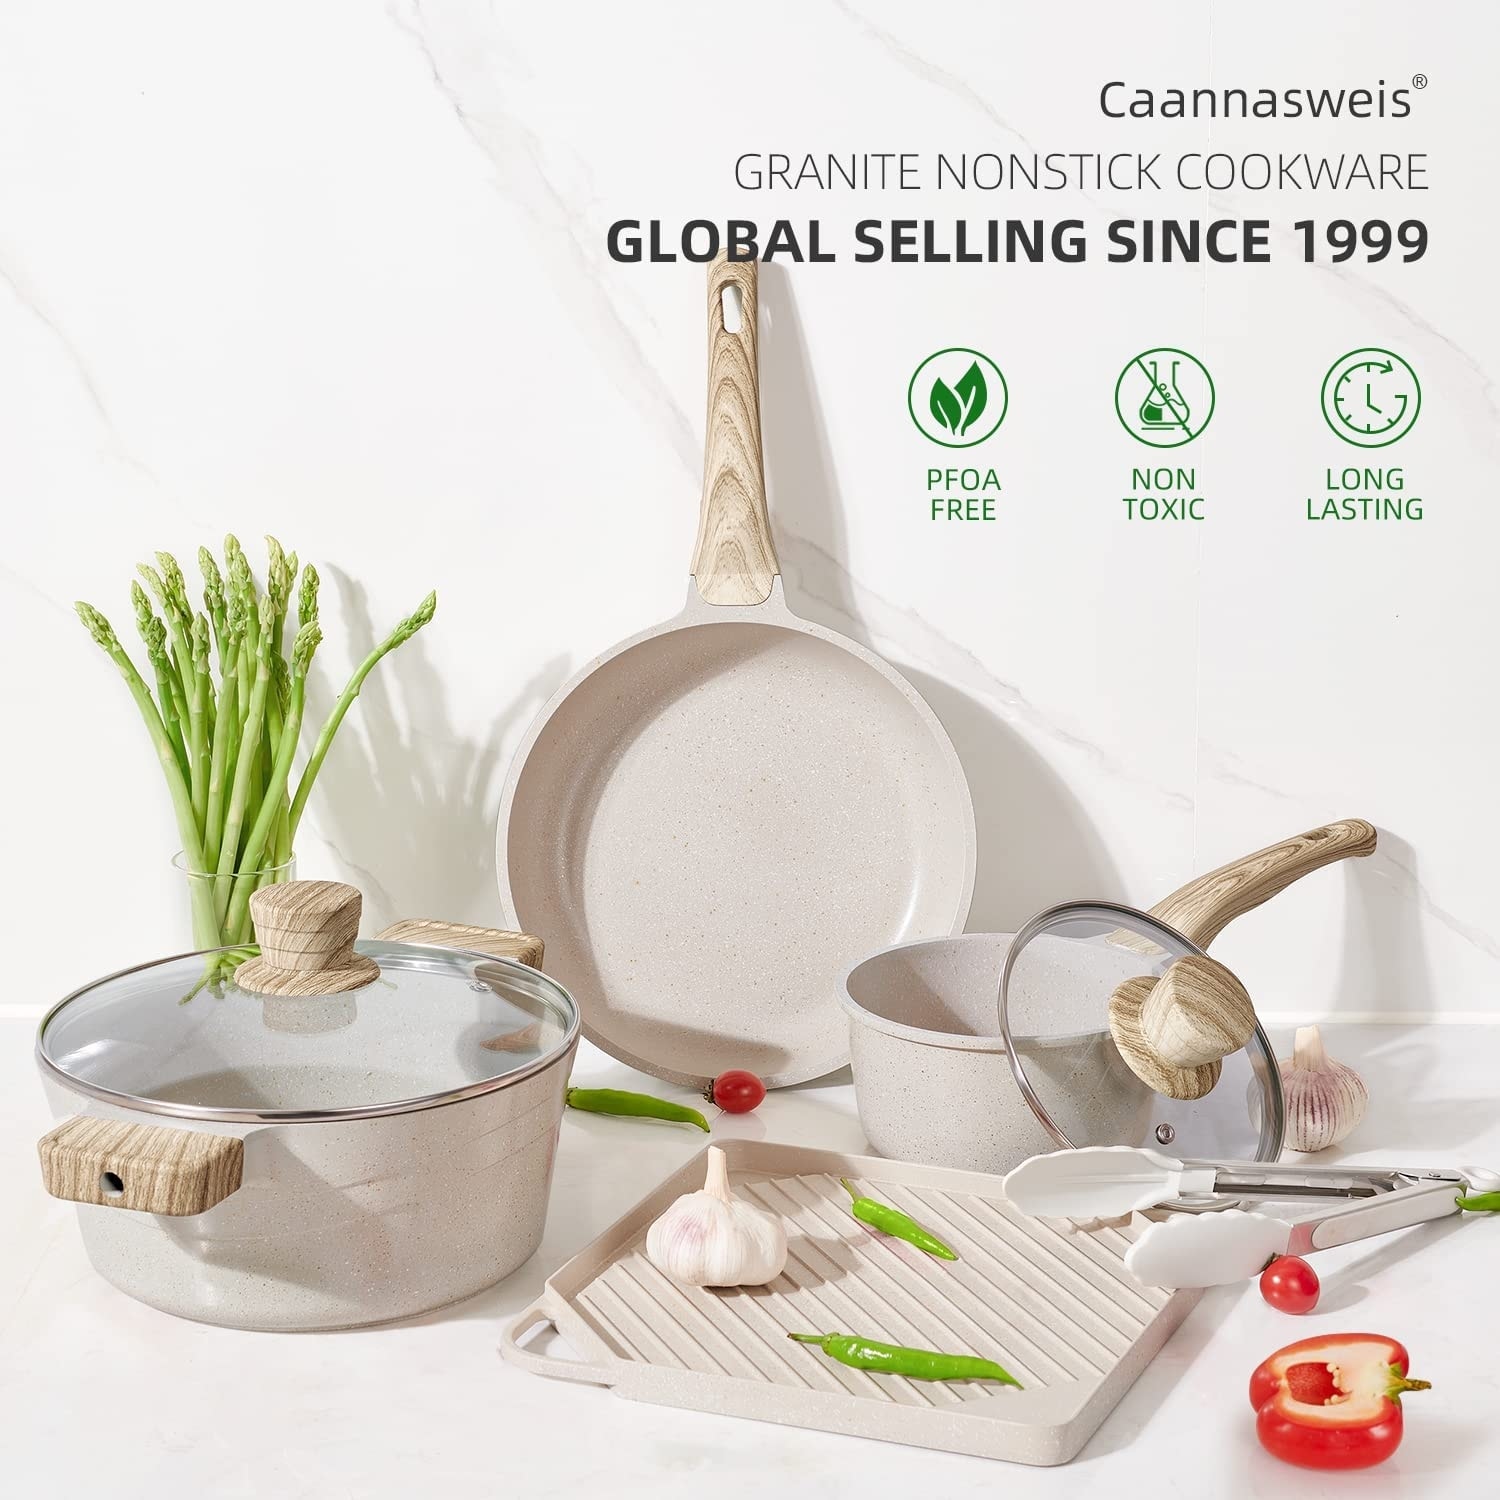 https://ak1.ostkcdn.com/images/products/is/images/direct/f0858dc31fb3ed3cad8f5ee6e38f374ae06adecf/Pots-and-Pans-Set---Caannasweis-Kitchen-Nonstick-Cookware-Sets-Granite-Frying-Pans-for-Cooking-Marble-Stone-Pan-Sets.jpg